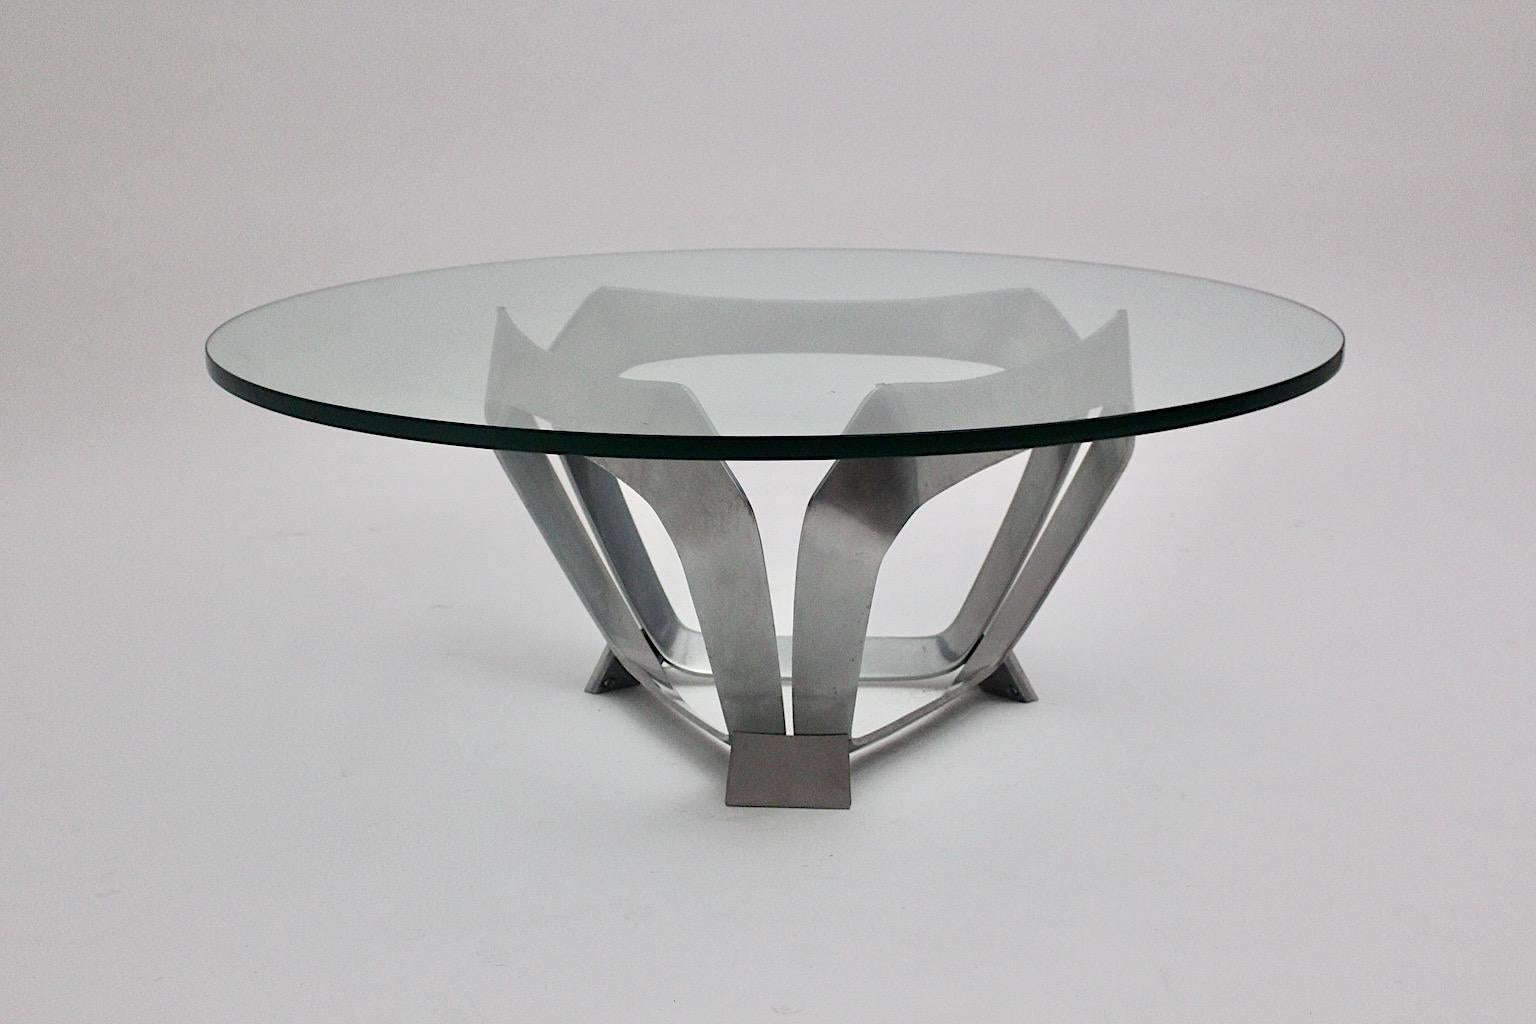 Aluminum Glass Space Age Vintage Coffee Table by Knut Hesterberg 1960s Germany In Good Condition For Sale In Vienna, AT